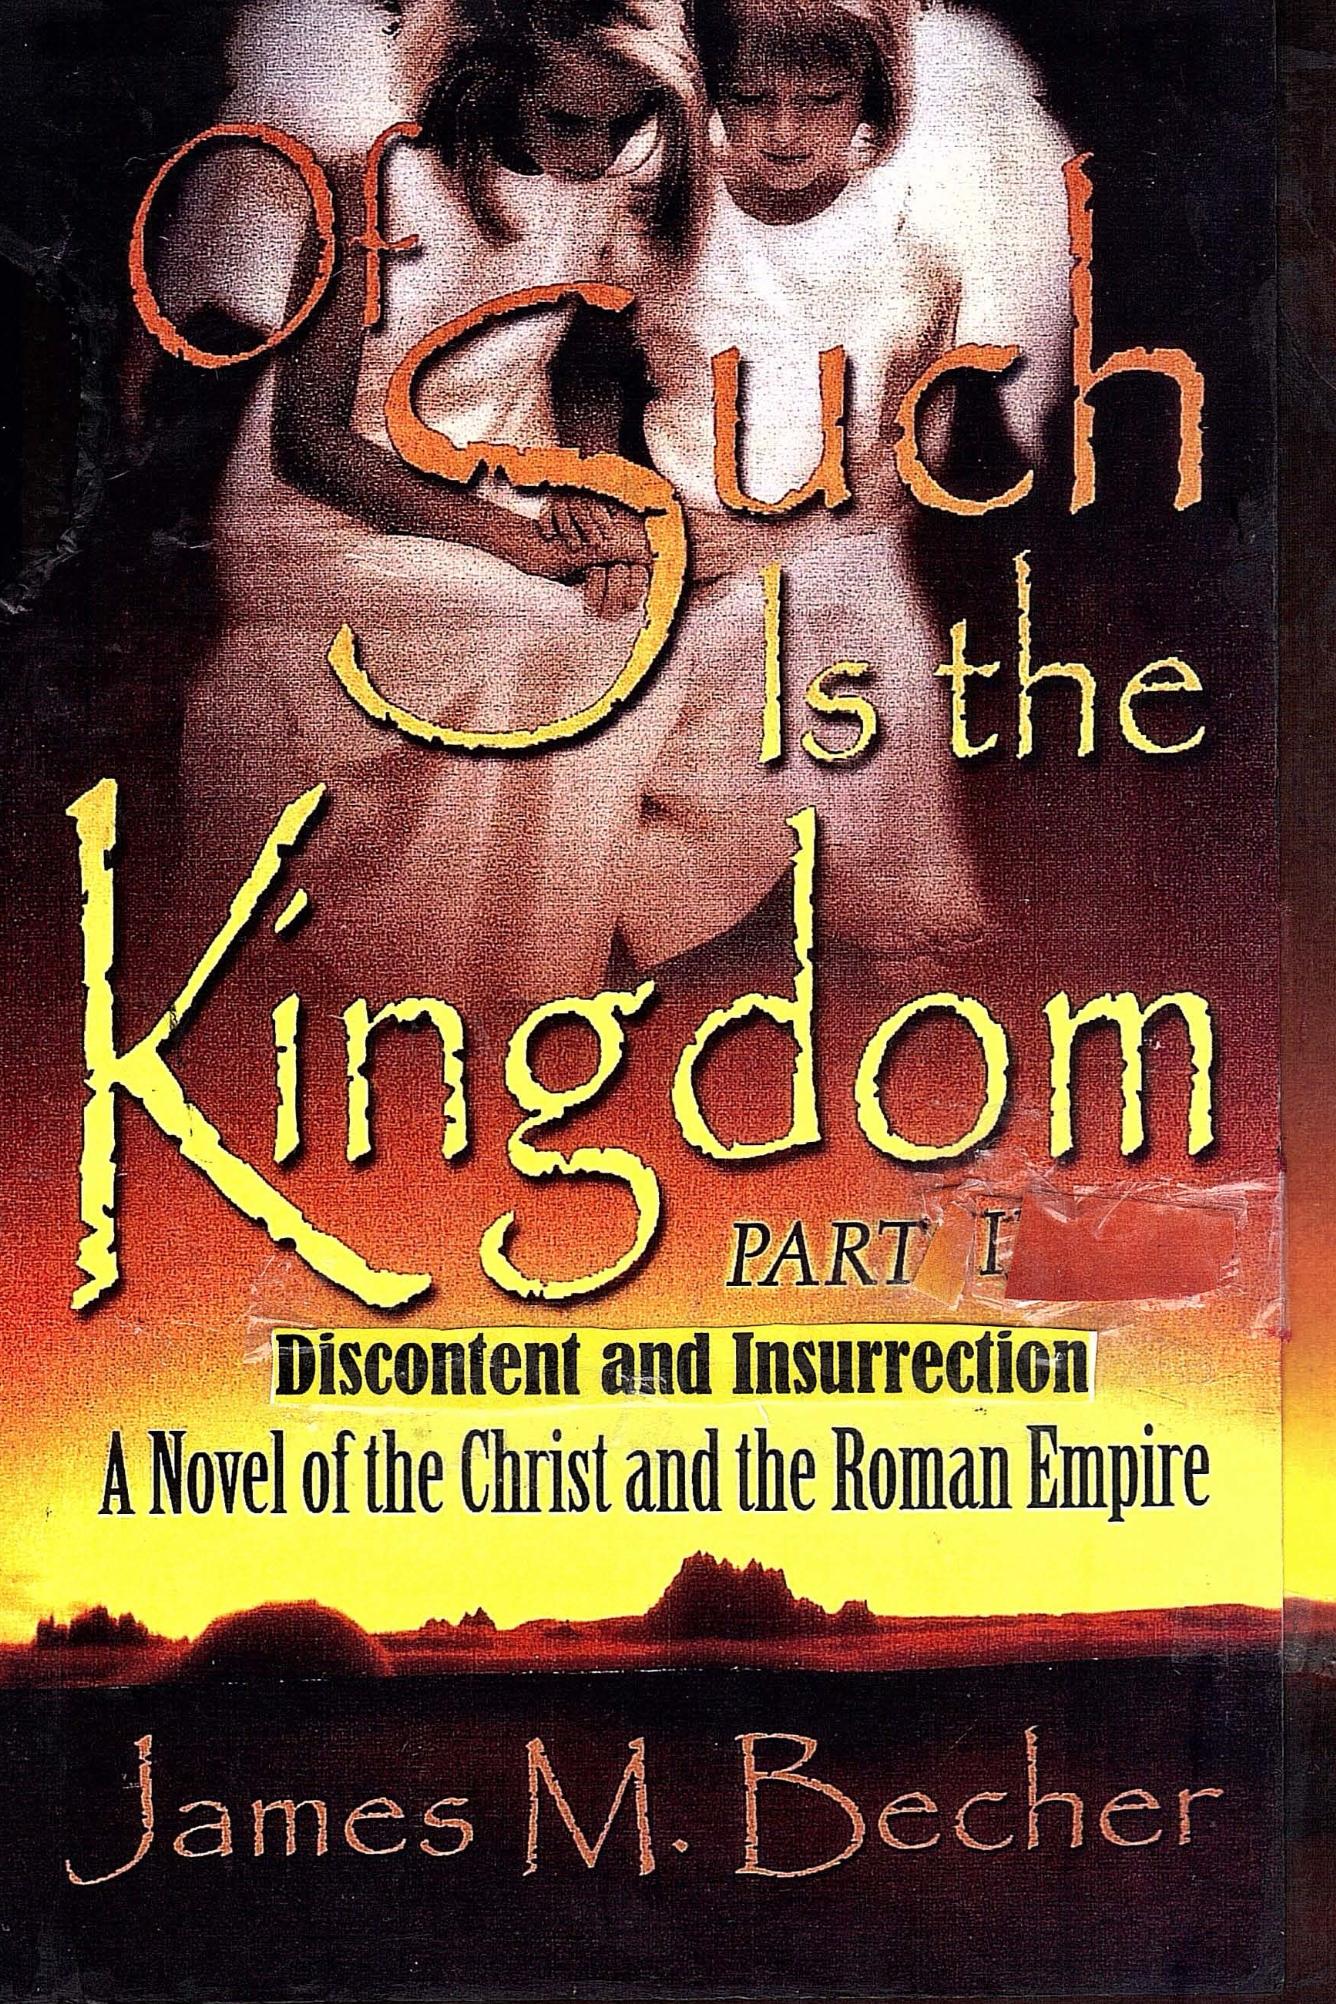 FREE: Of Such Is The Kingdom, Part I, Discontent and Insurrection, A Novel of the Christ and the Roman Empire by James M. Becher